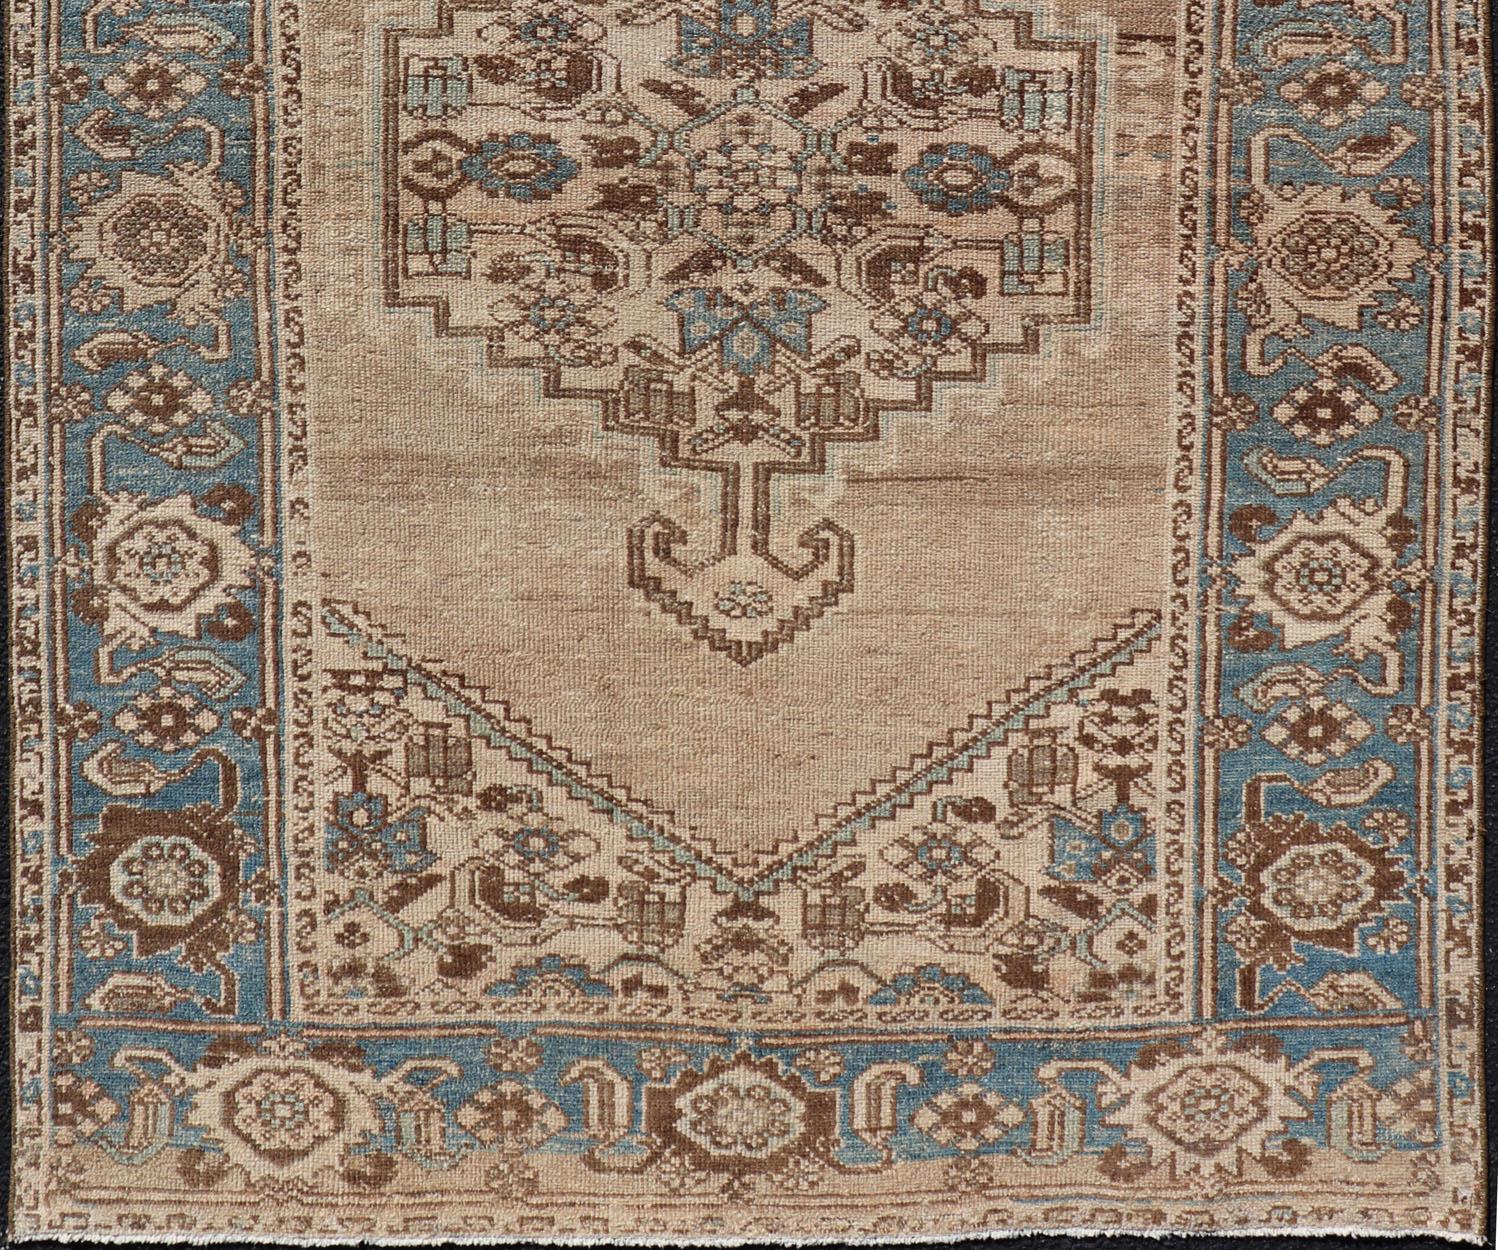 Antique Persian Hamadan Rug with Medallion Design in Tan, Light Blue & Brown For Sale 2